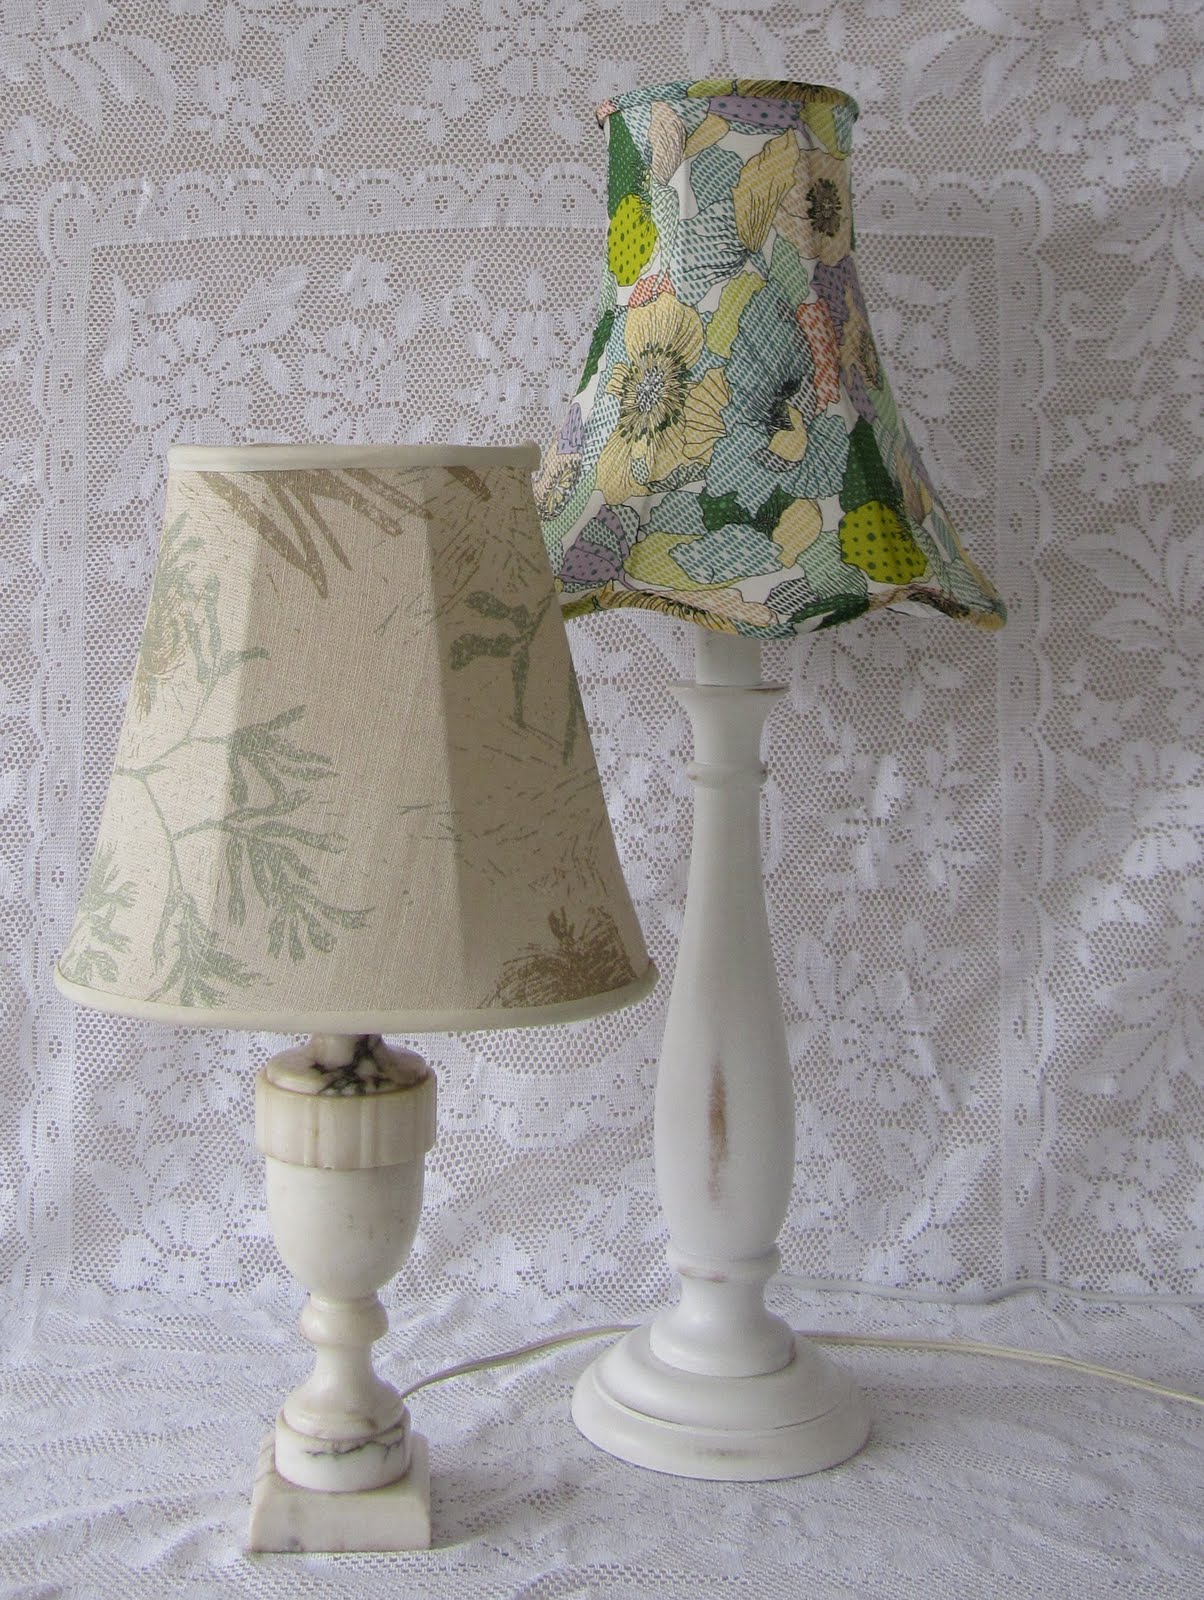 Lampshade Tutorial, How To Replace A Lampshade Cover